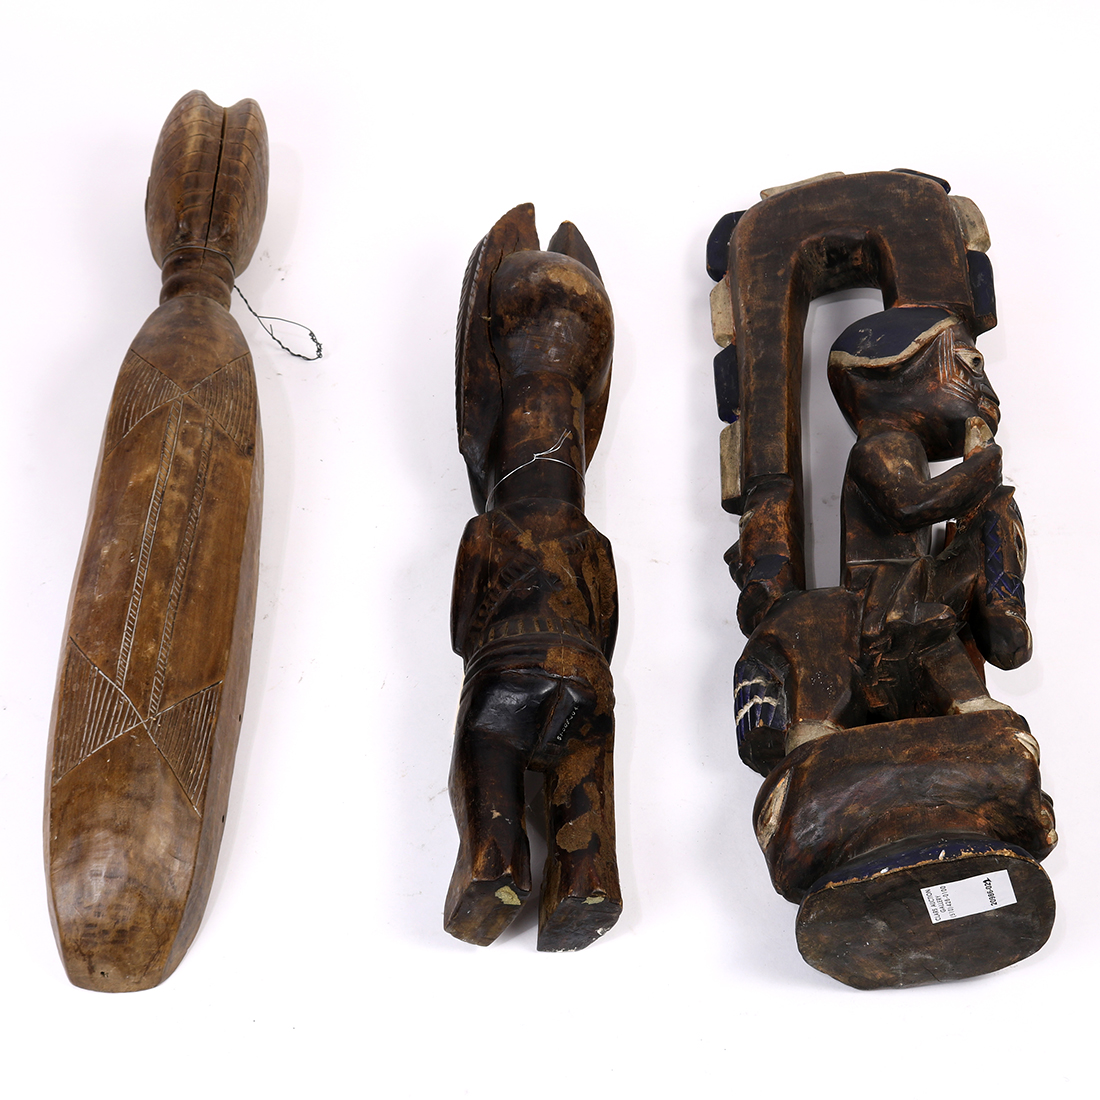 (lot of 3) African carved wood figural group, consisting of a non-traditional carved standing - Image 2 of 2